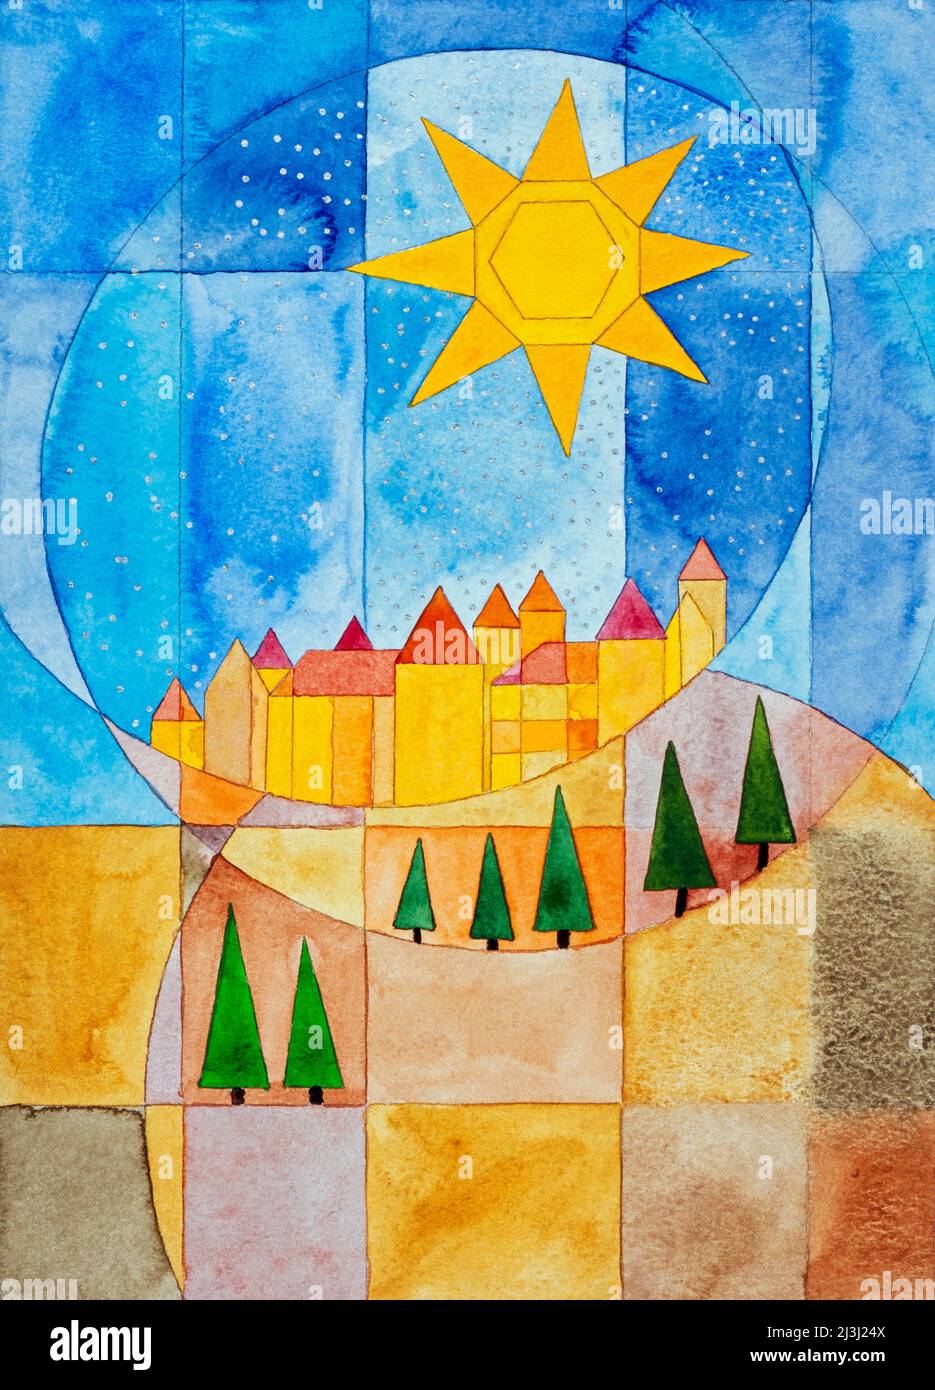 Watercolor by Heidrun Füssenhäuser Yellow star, blue sky, yellow houses, city, fields, yellow, blue, asterisks in the sky as silver dots. In A.No. 29-006-46 the stars are black. Stock Photo